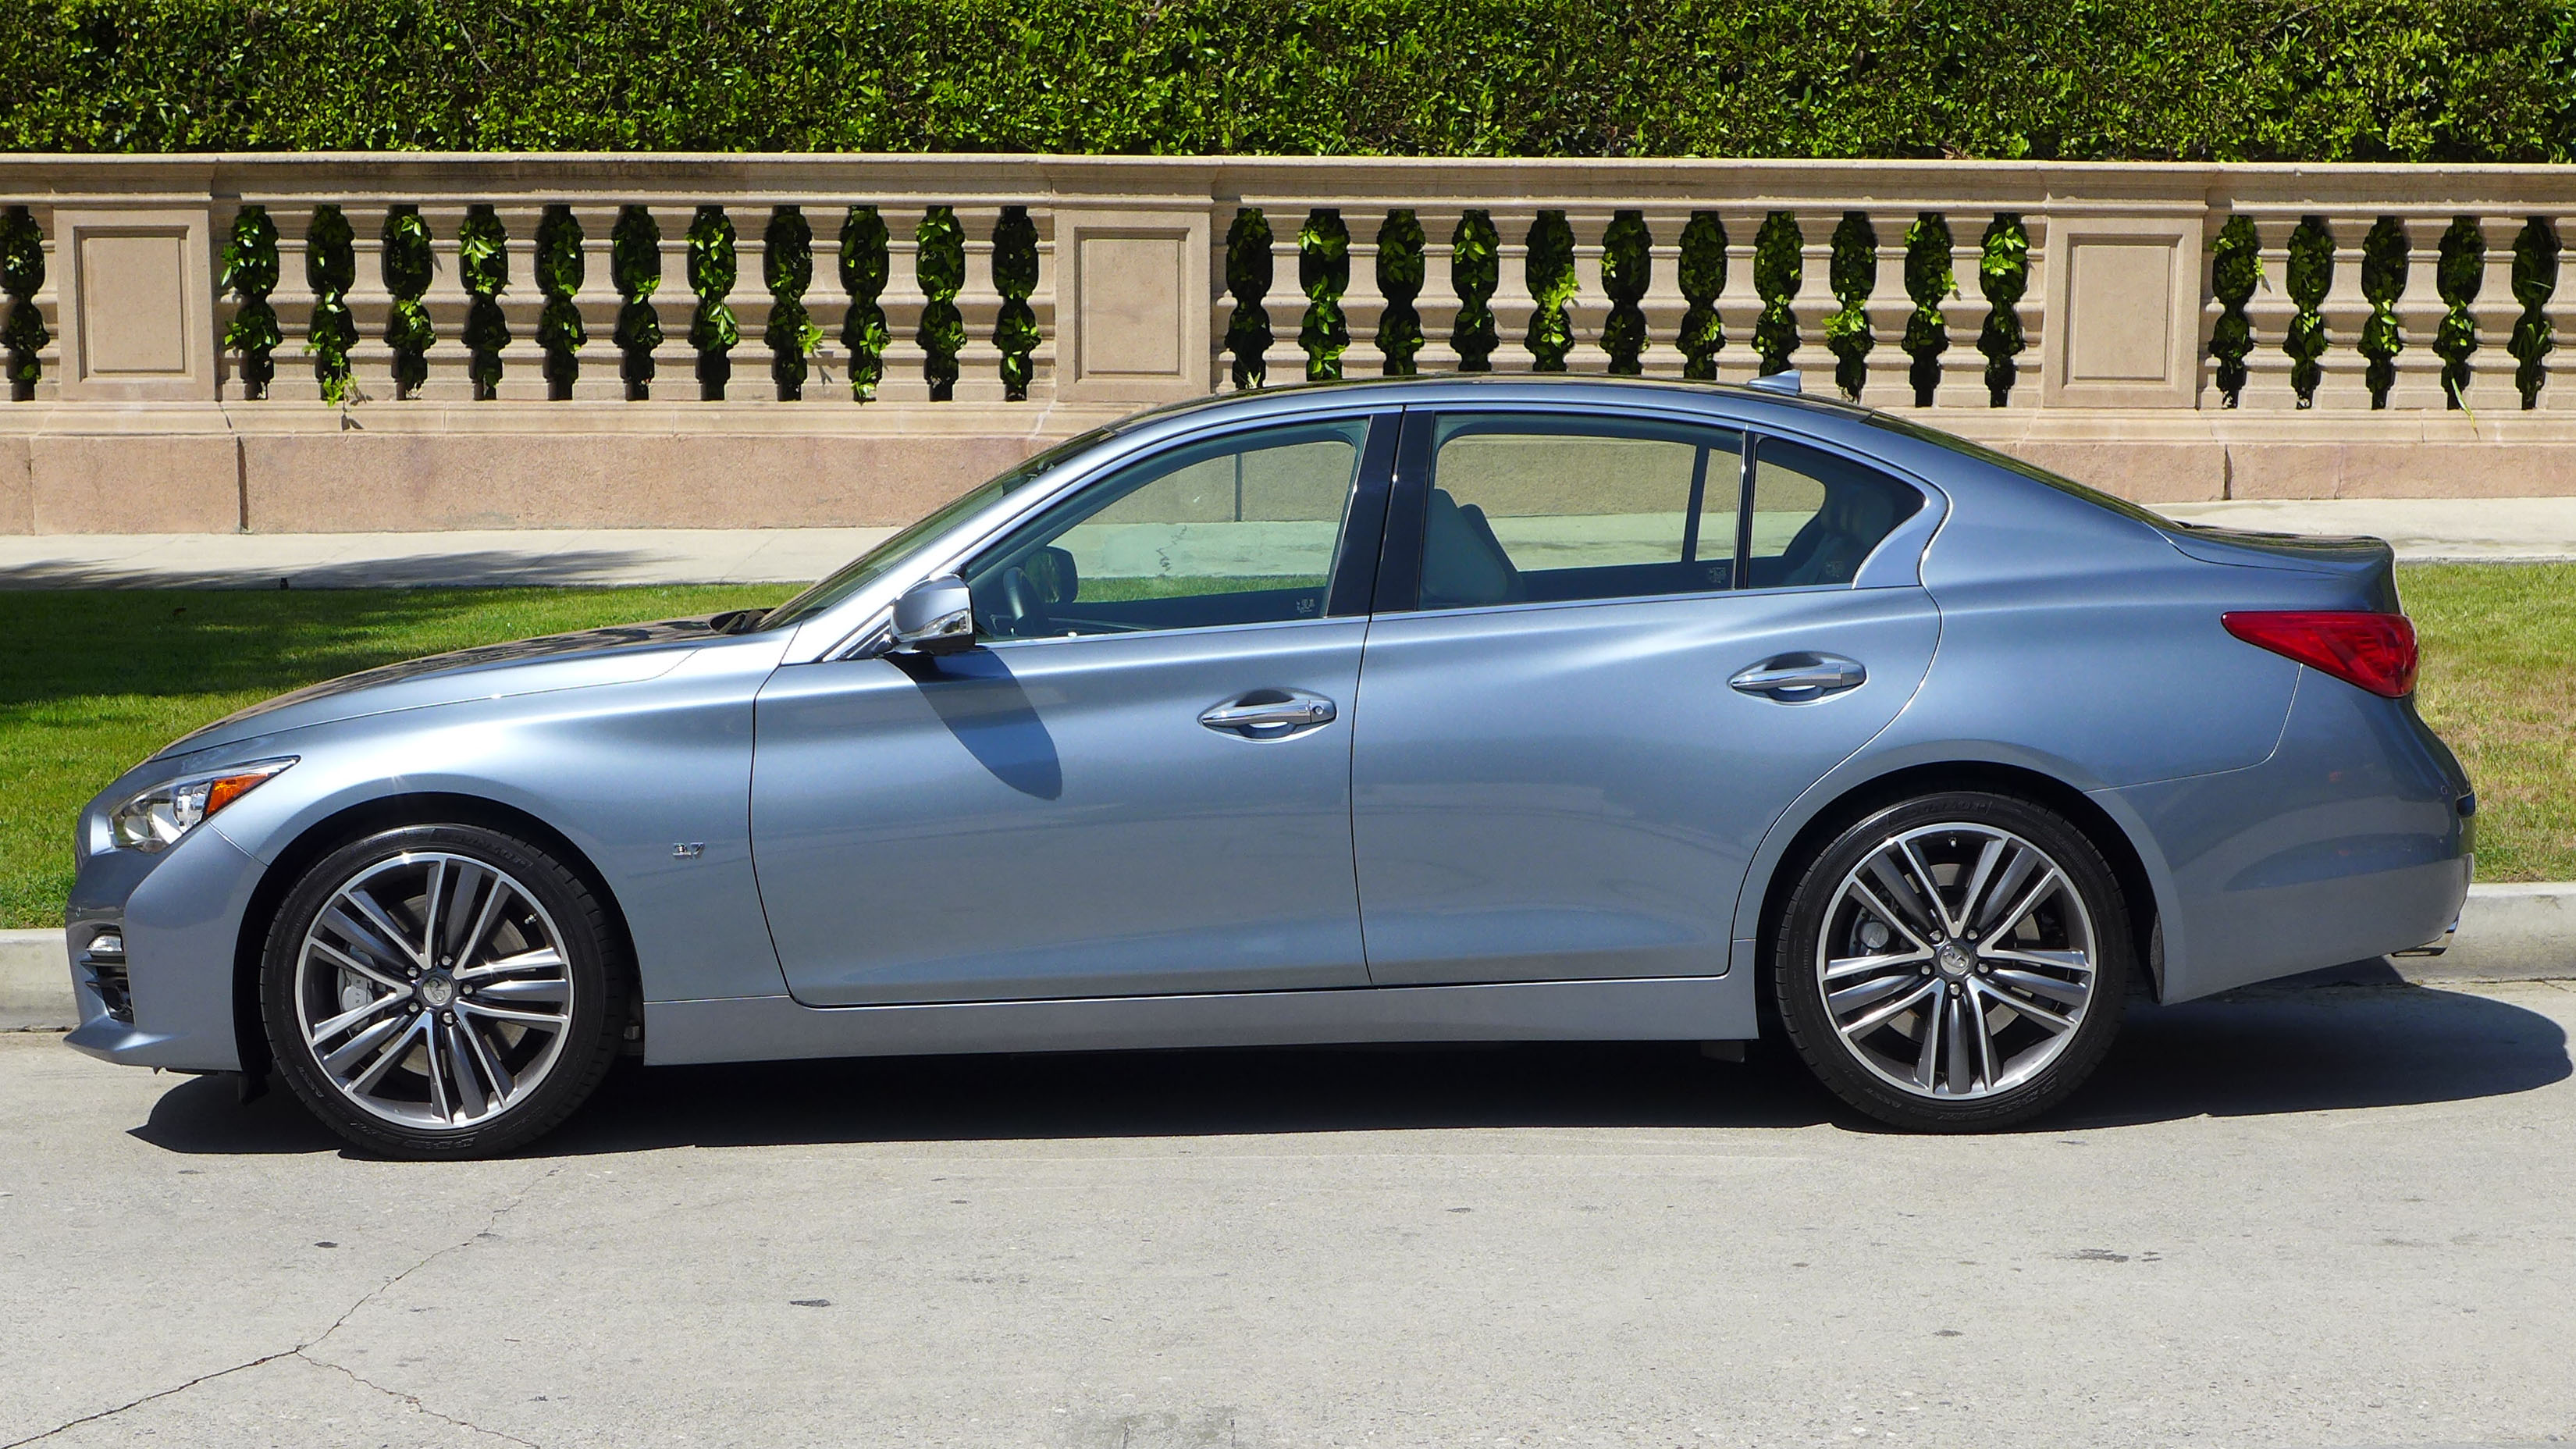 Infiniti Q50s 3.7 profile with sharp creases, flared haunches